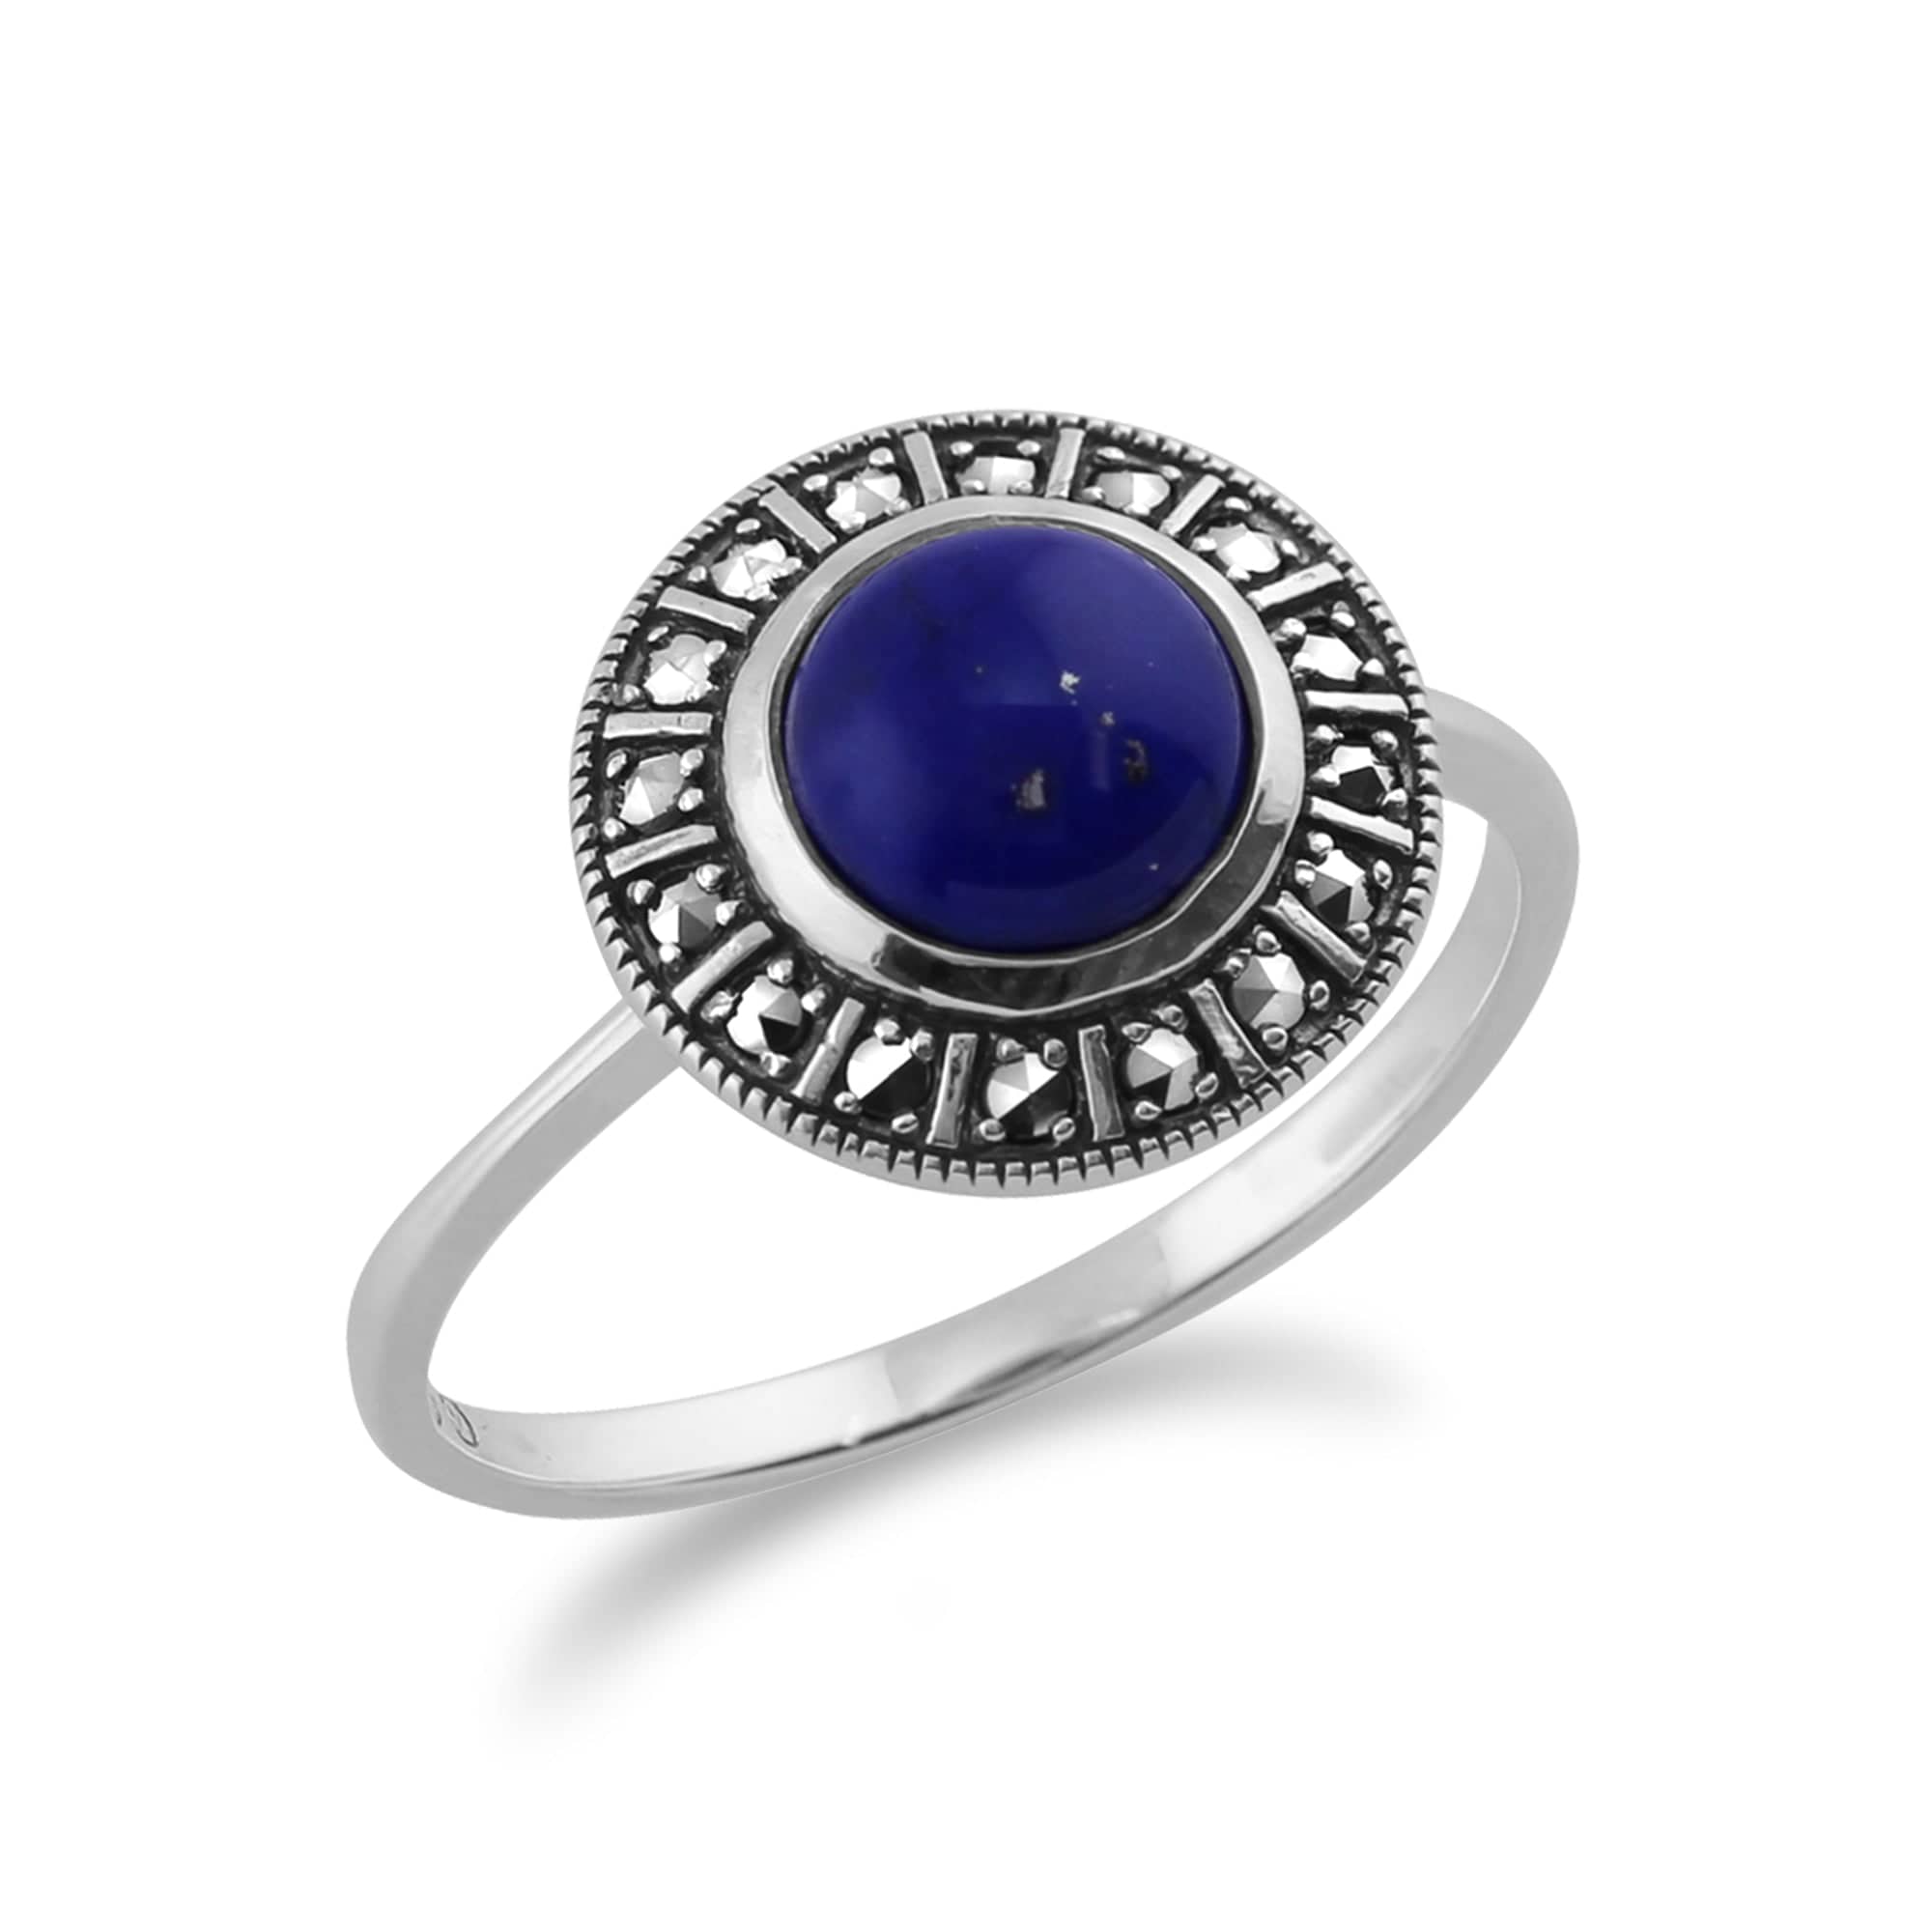 Art Deco Style Round Lapis Lazuli Cabochon & Marcasite Halo Ring in 925 Sterling Silver 1